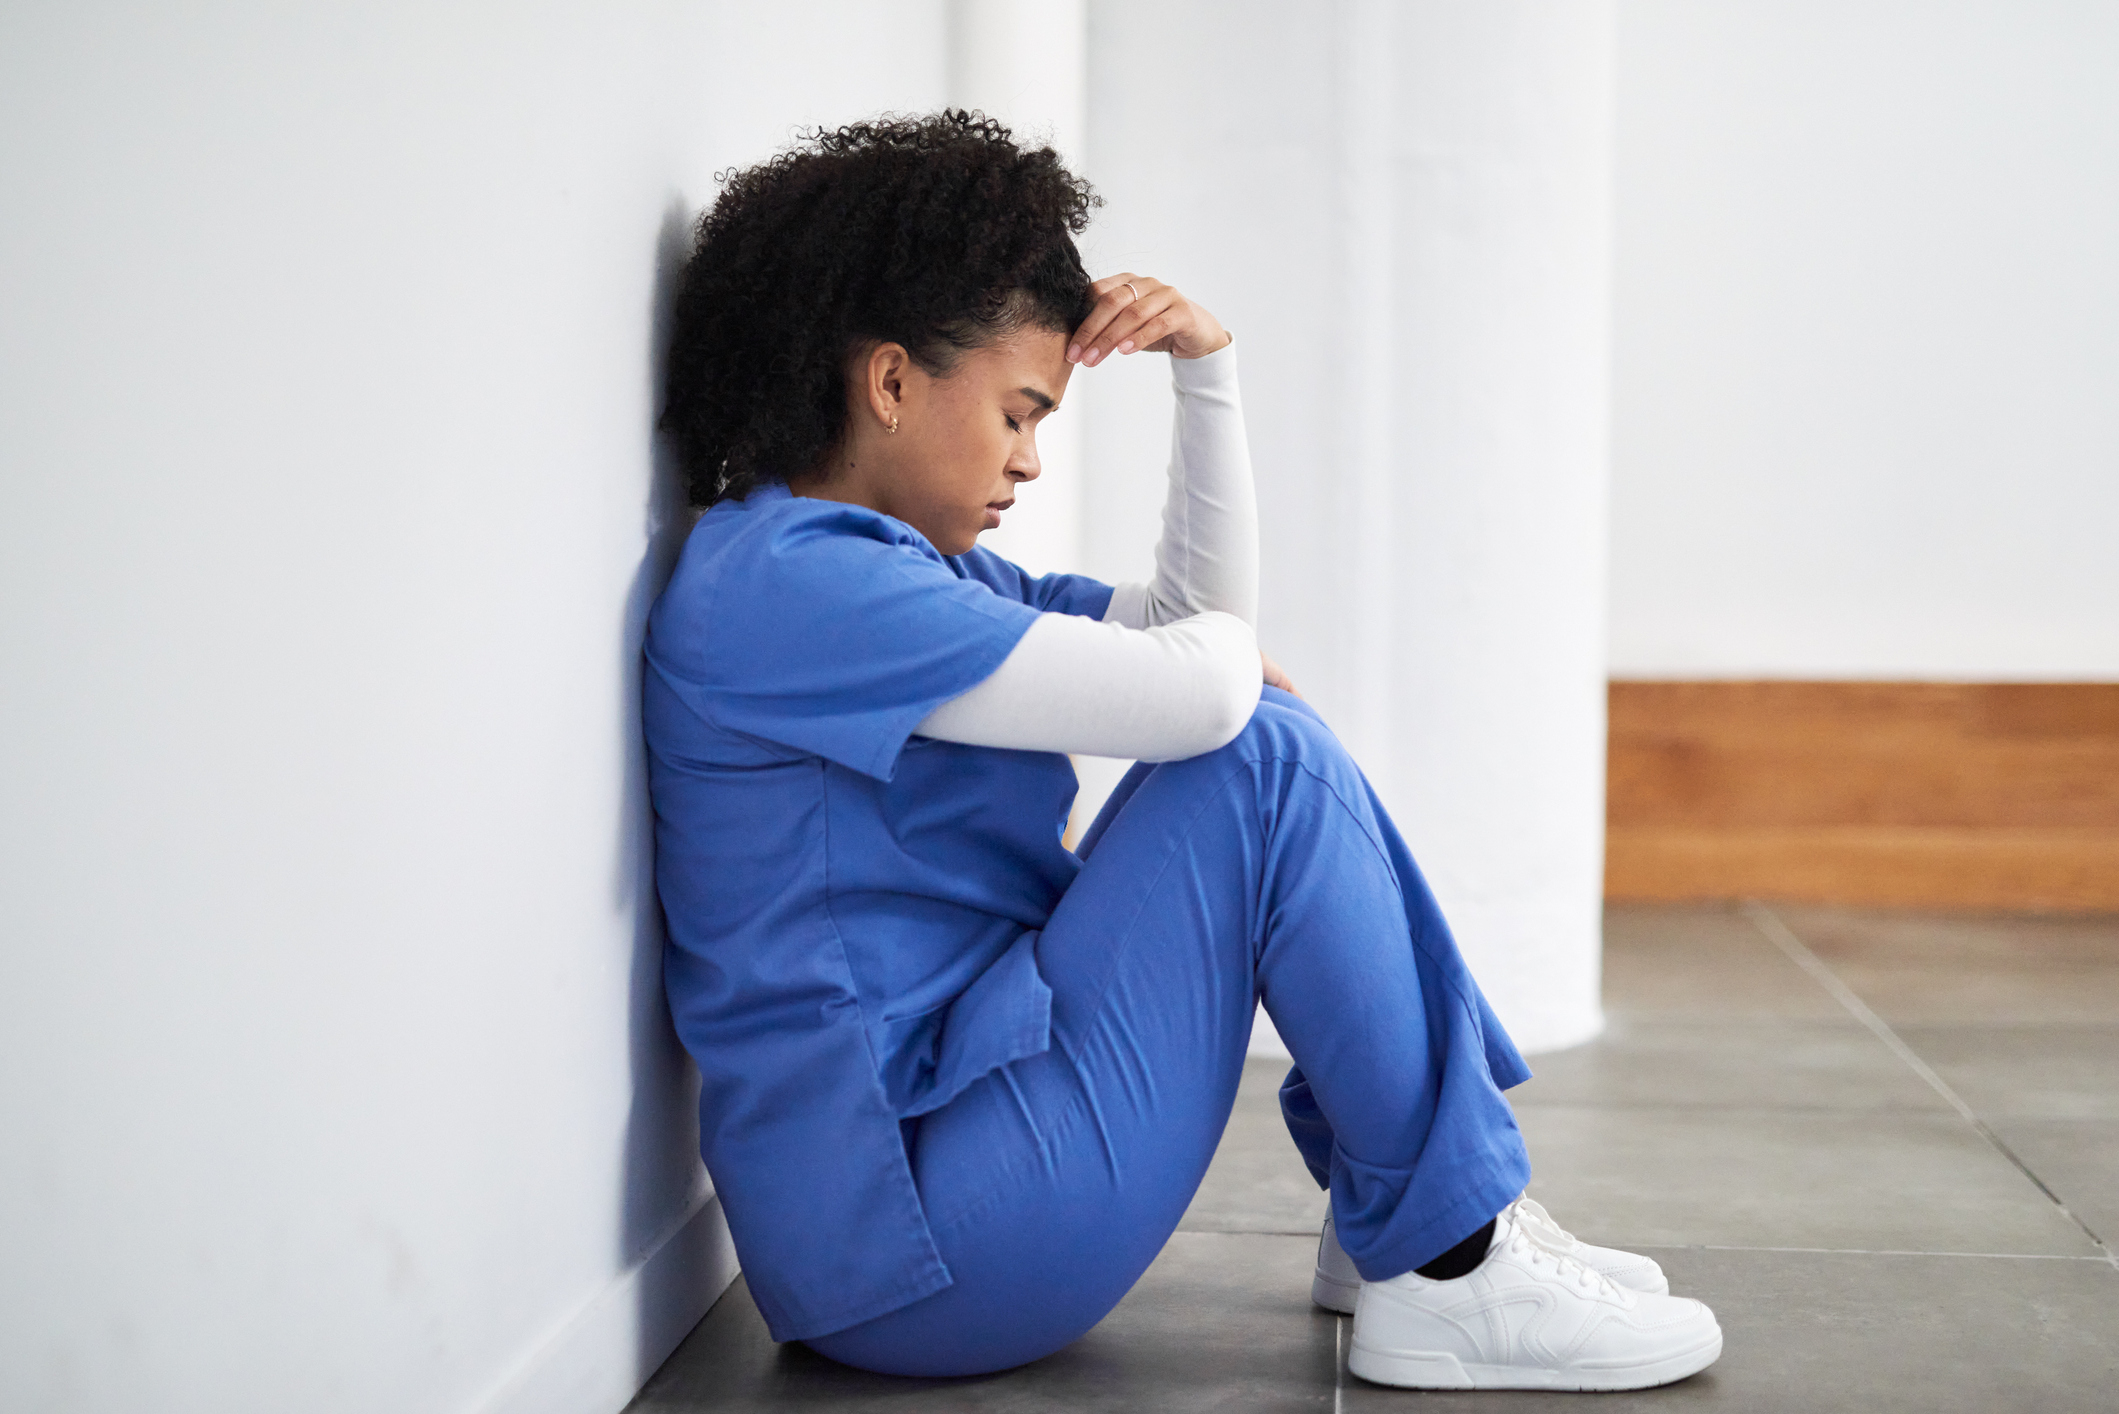 A person in medical scrubs sits on the floor, leaning against a wall in a pensive pose